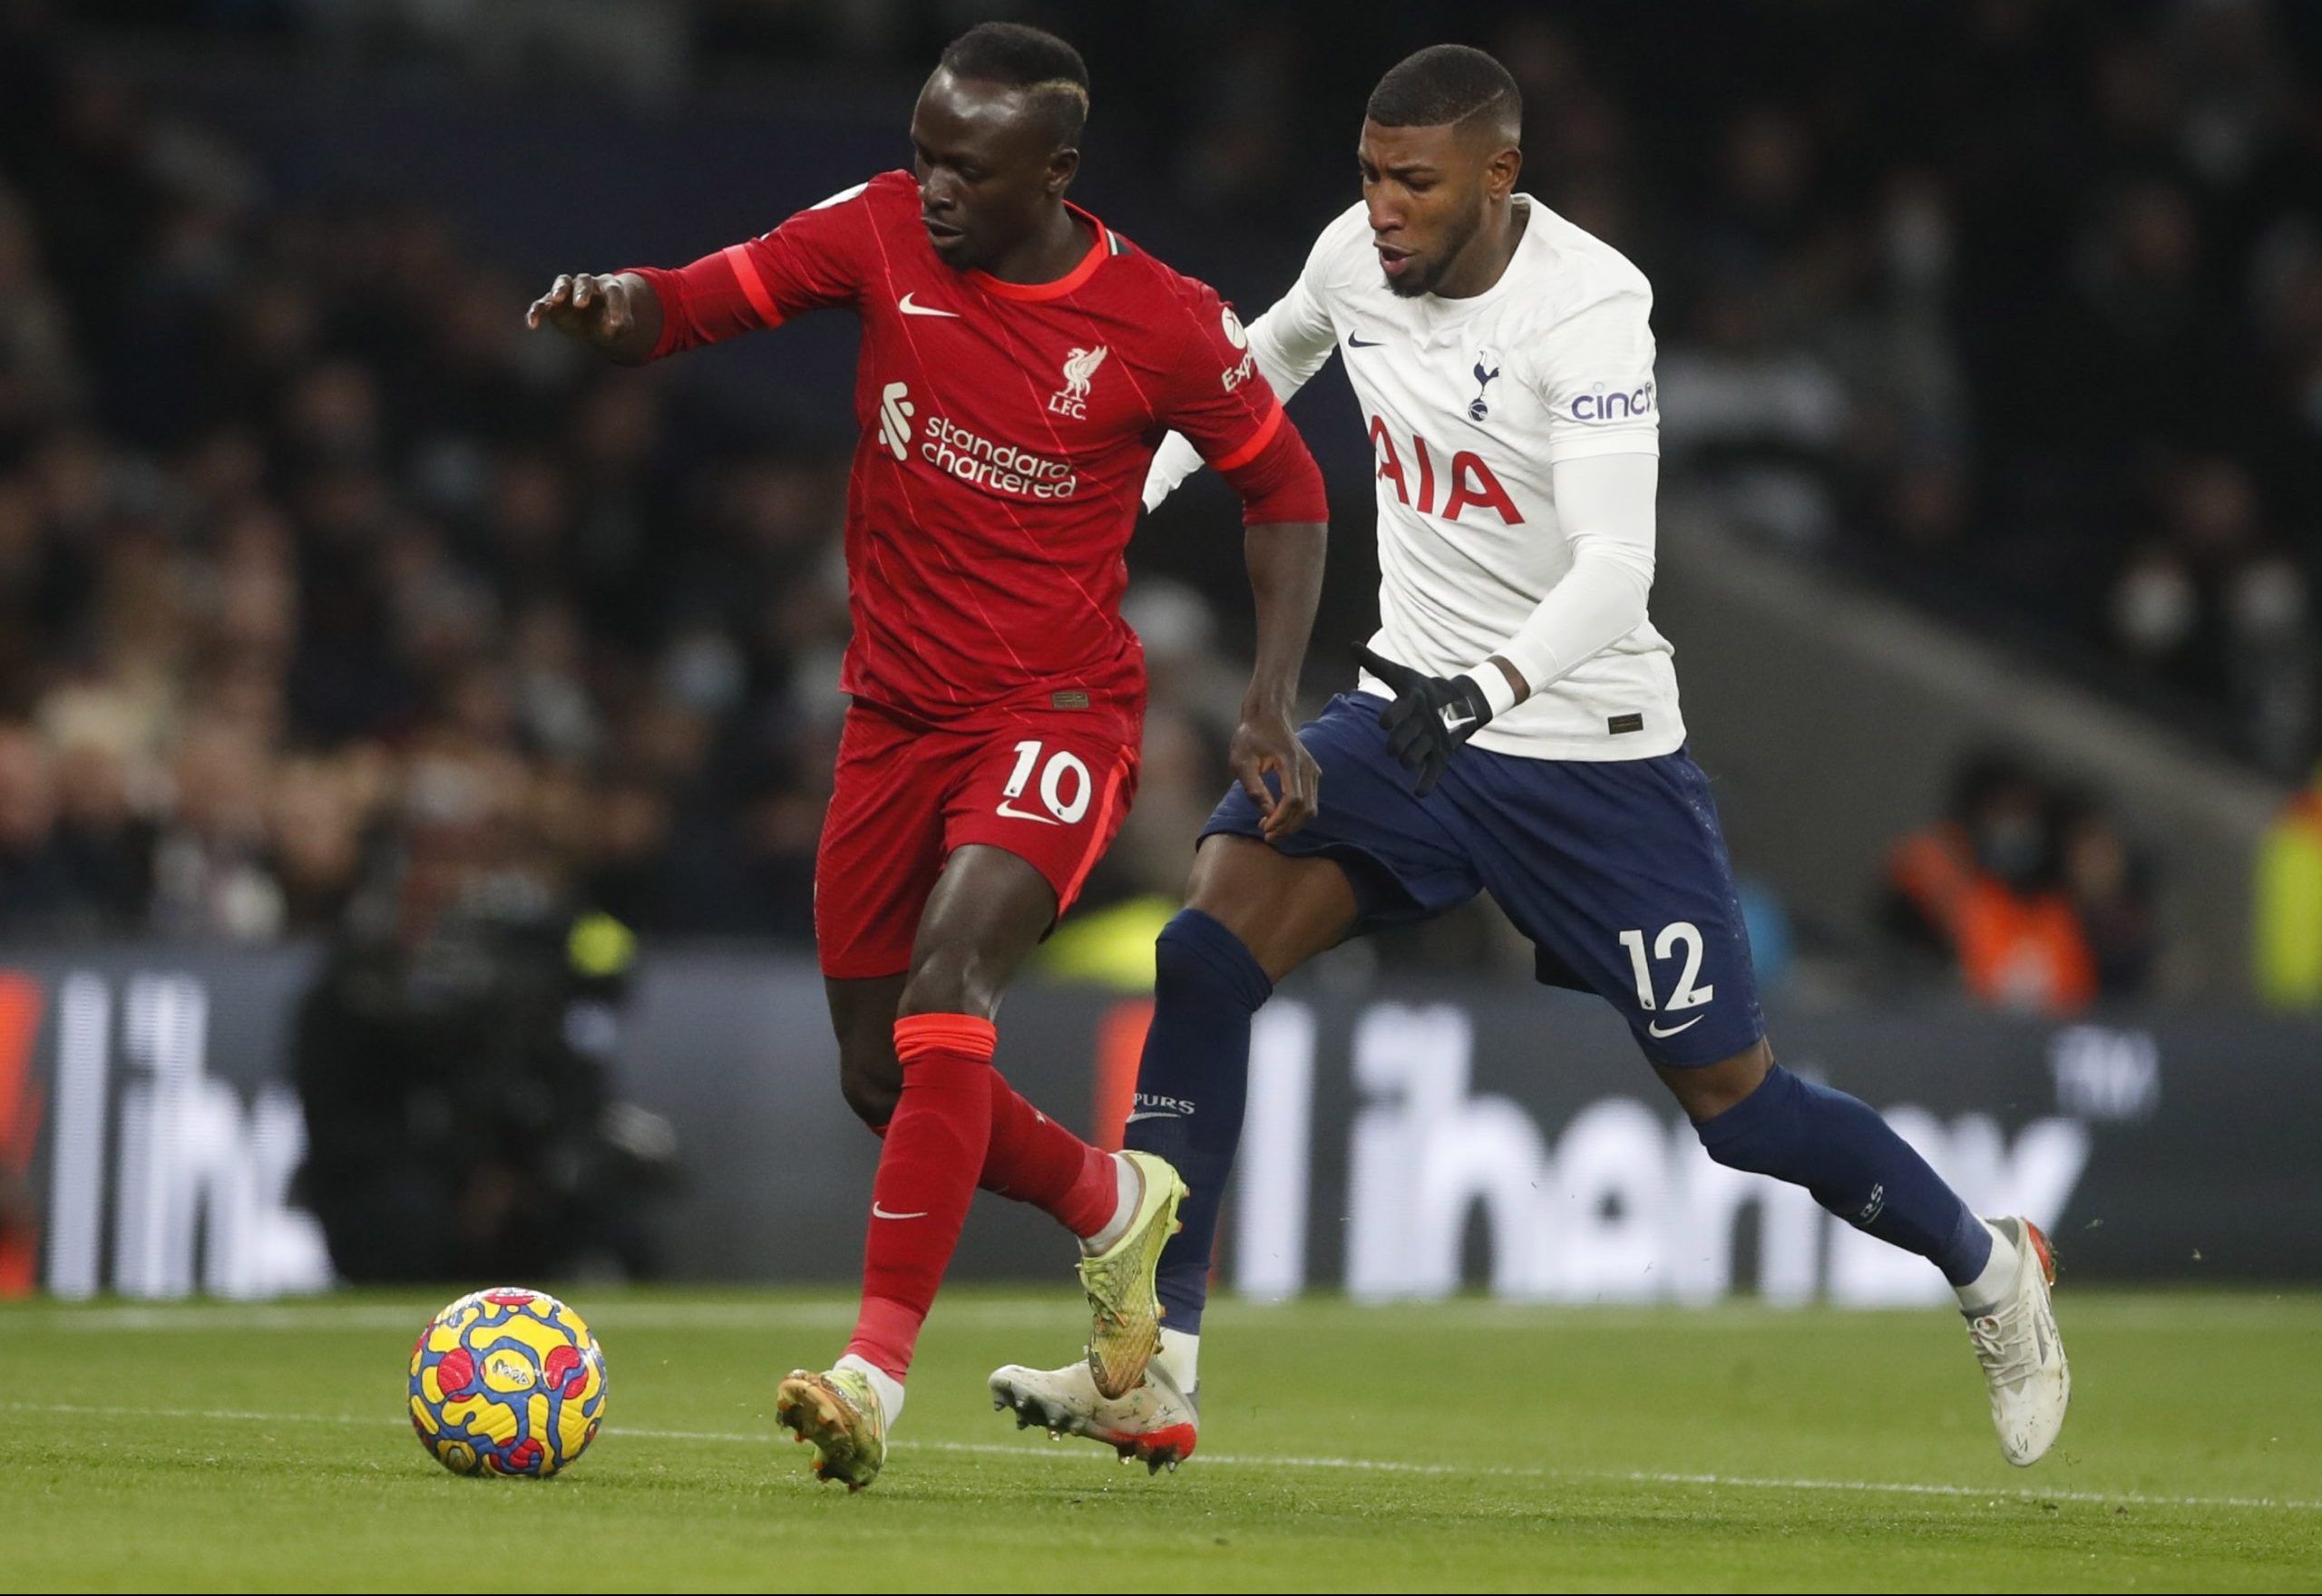 Soccer Football - Premier League - Tottenham Hotspur v Liverpool - Tottenham Hotspur Stadium, London, Britain - December 19, 2021 Liverpool's Sadio Mane in action with Tottenham Hotspur's Emerson Royal Action Images via Reuters/Matthew Childs EDITORIAL USE ONLY. No use with unauthorized audio, video, data, fixture lists, club/league logos or 'live' services. Online in-match use limited to 75 images, no video emulation. No use in betting, games or single club /league/player publications.  Please 